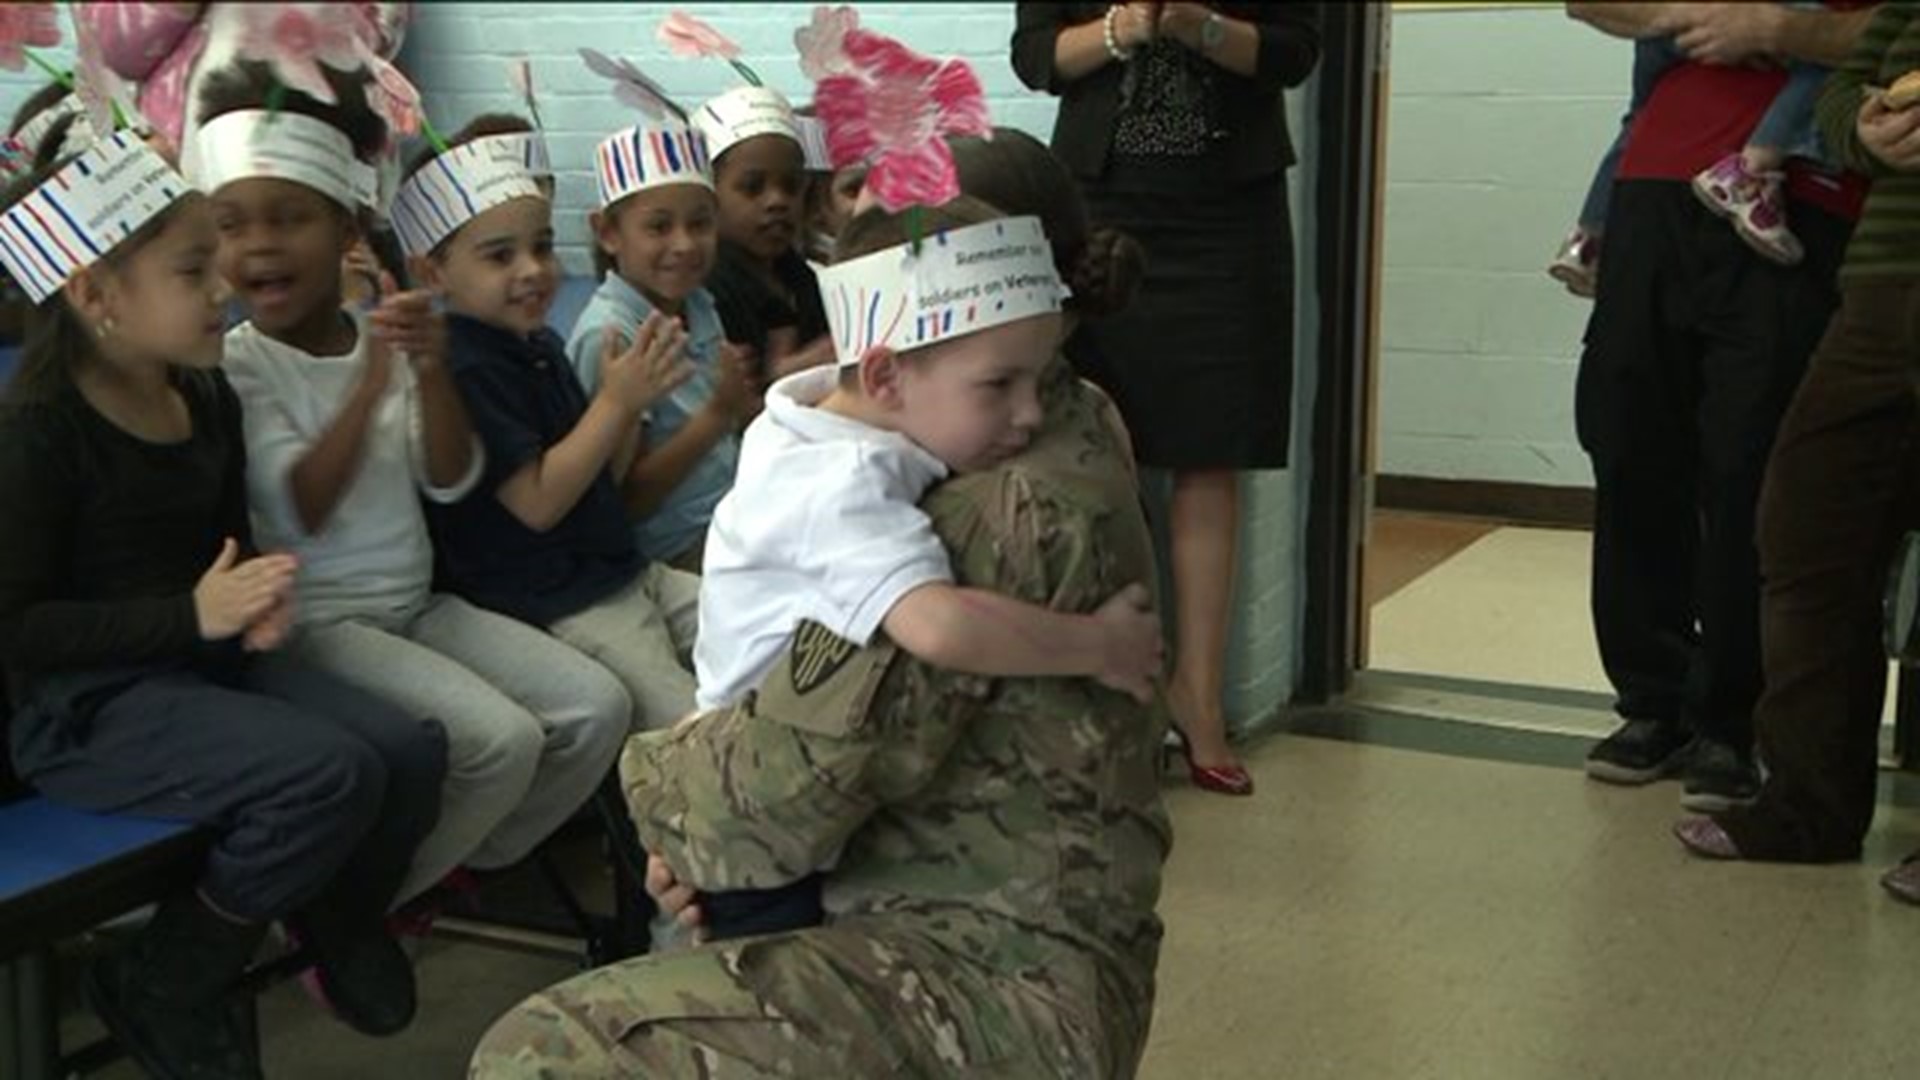 One military aunt has a special surprise for her nephew